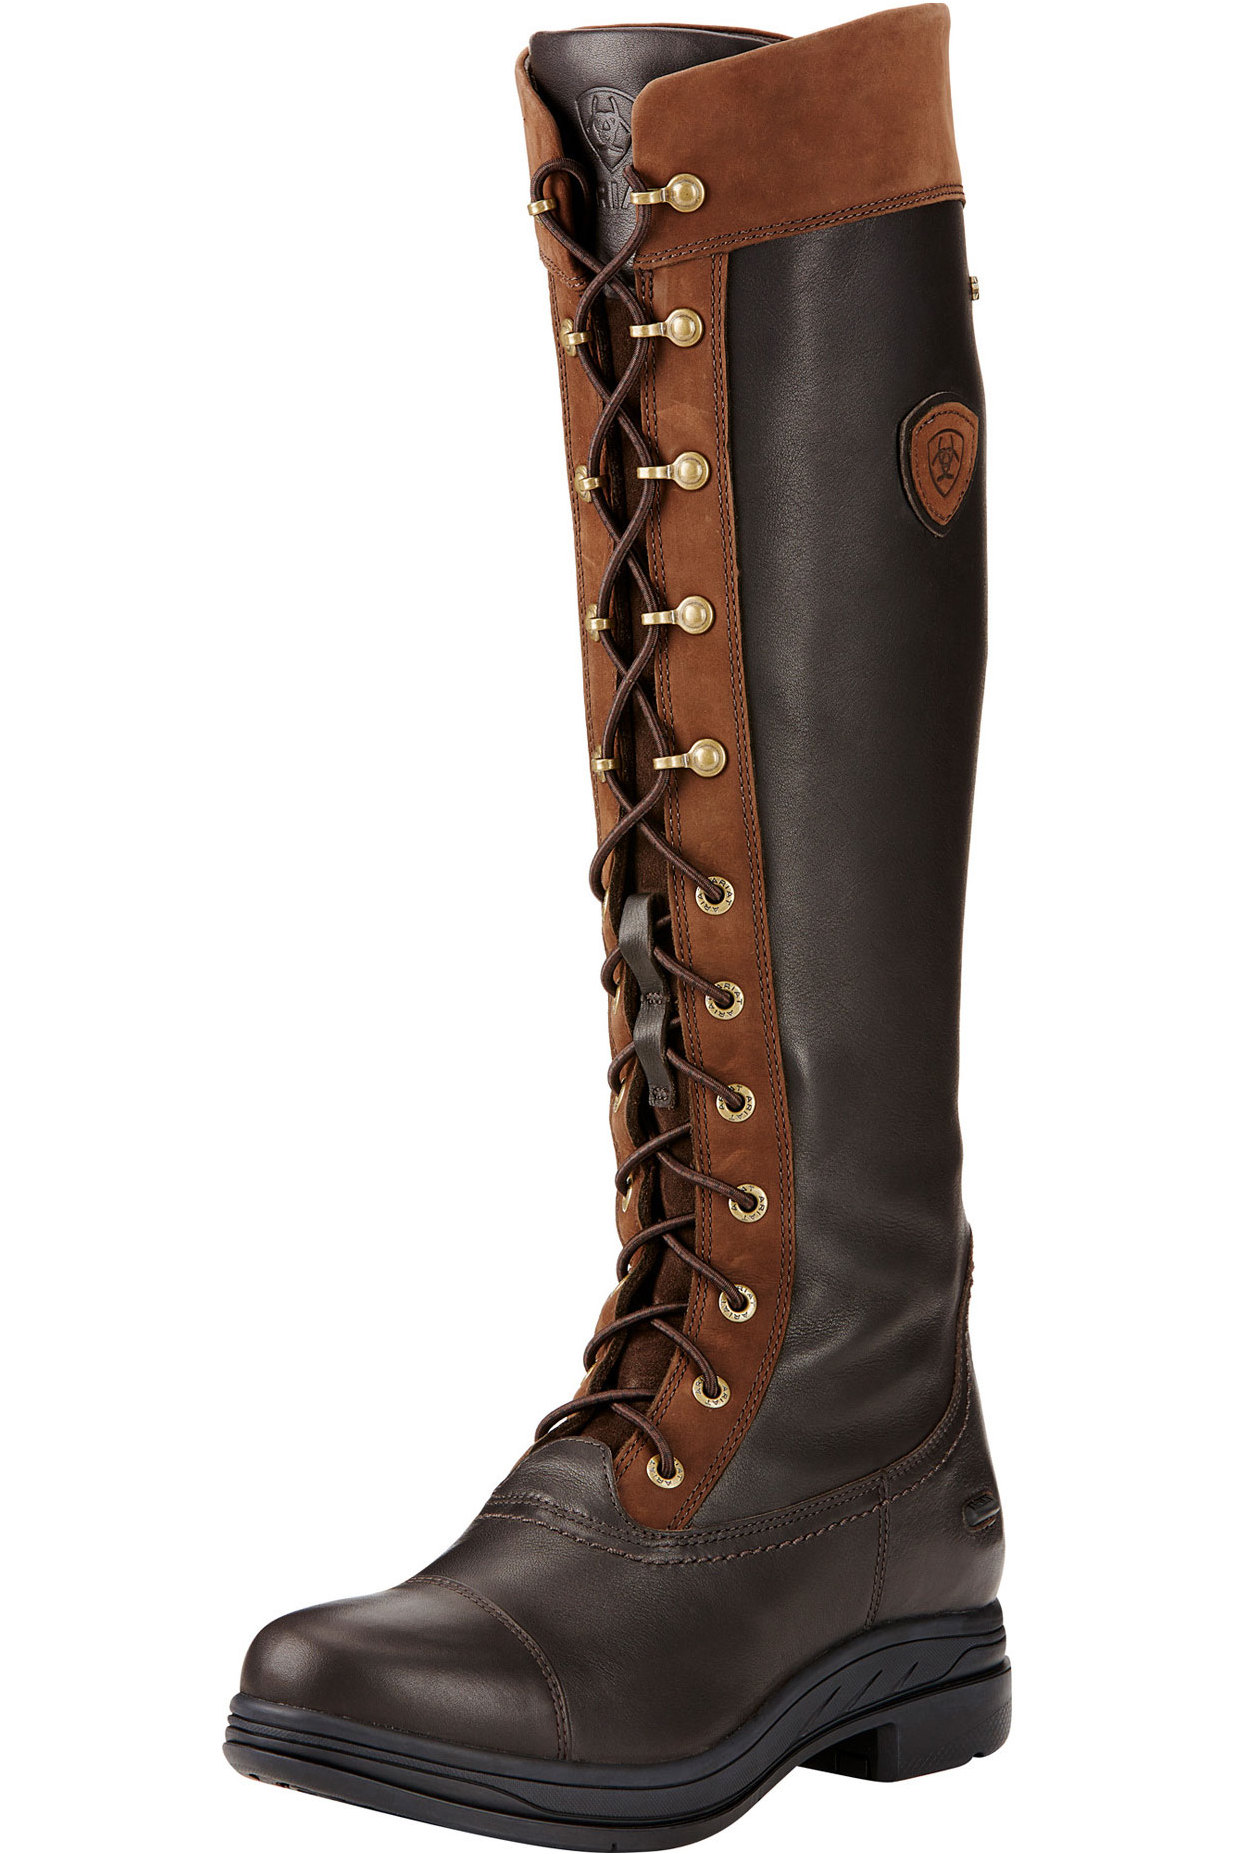 Lyst - Sorel Tofino Quilted Water-Resistant Boots in Black